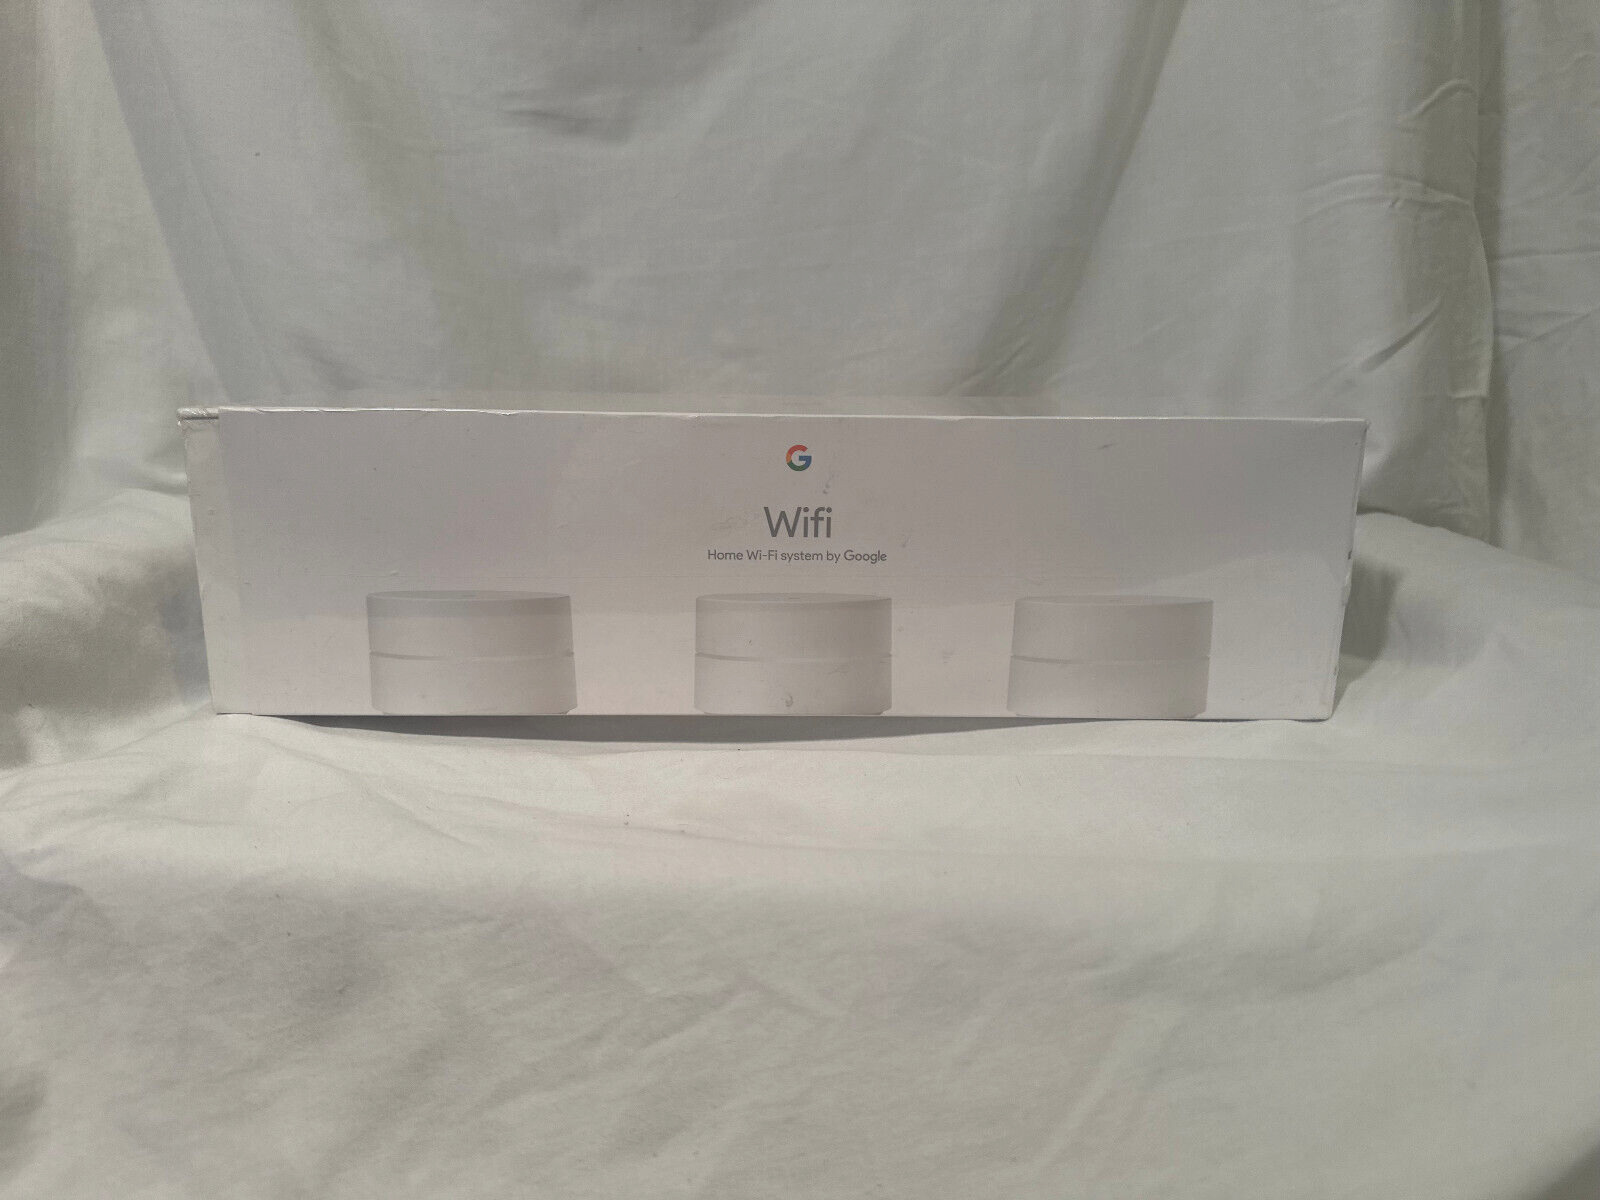 Google Nest Wifi Router and 2 Points A4RAC-1304 - Snow-NEW *Home WIFI System*